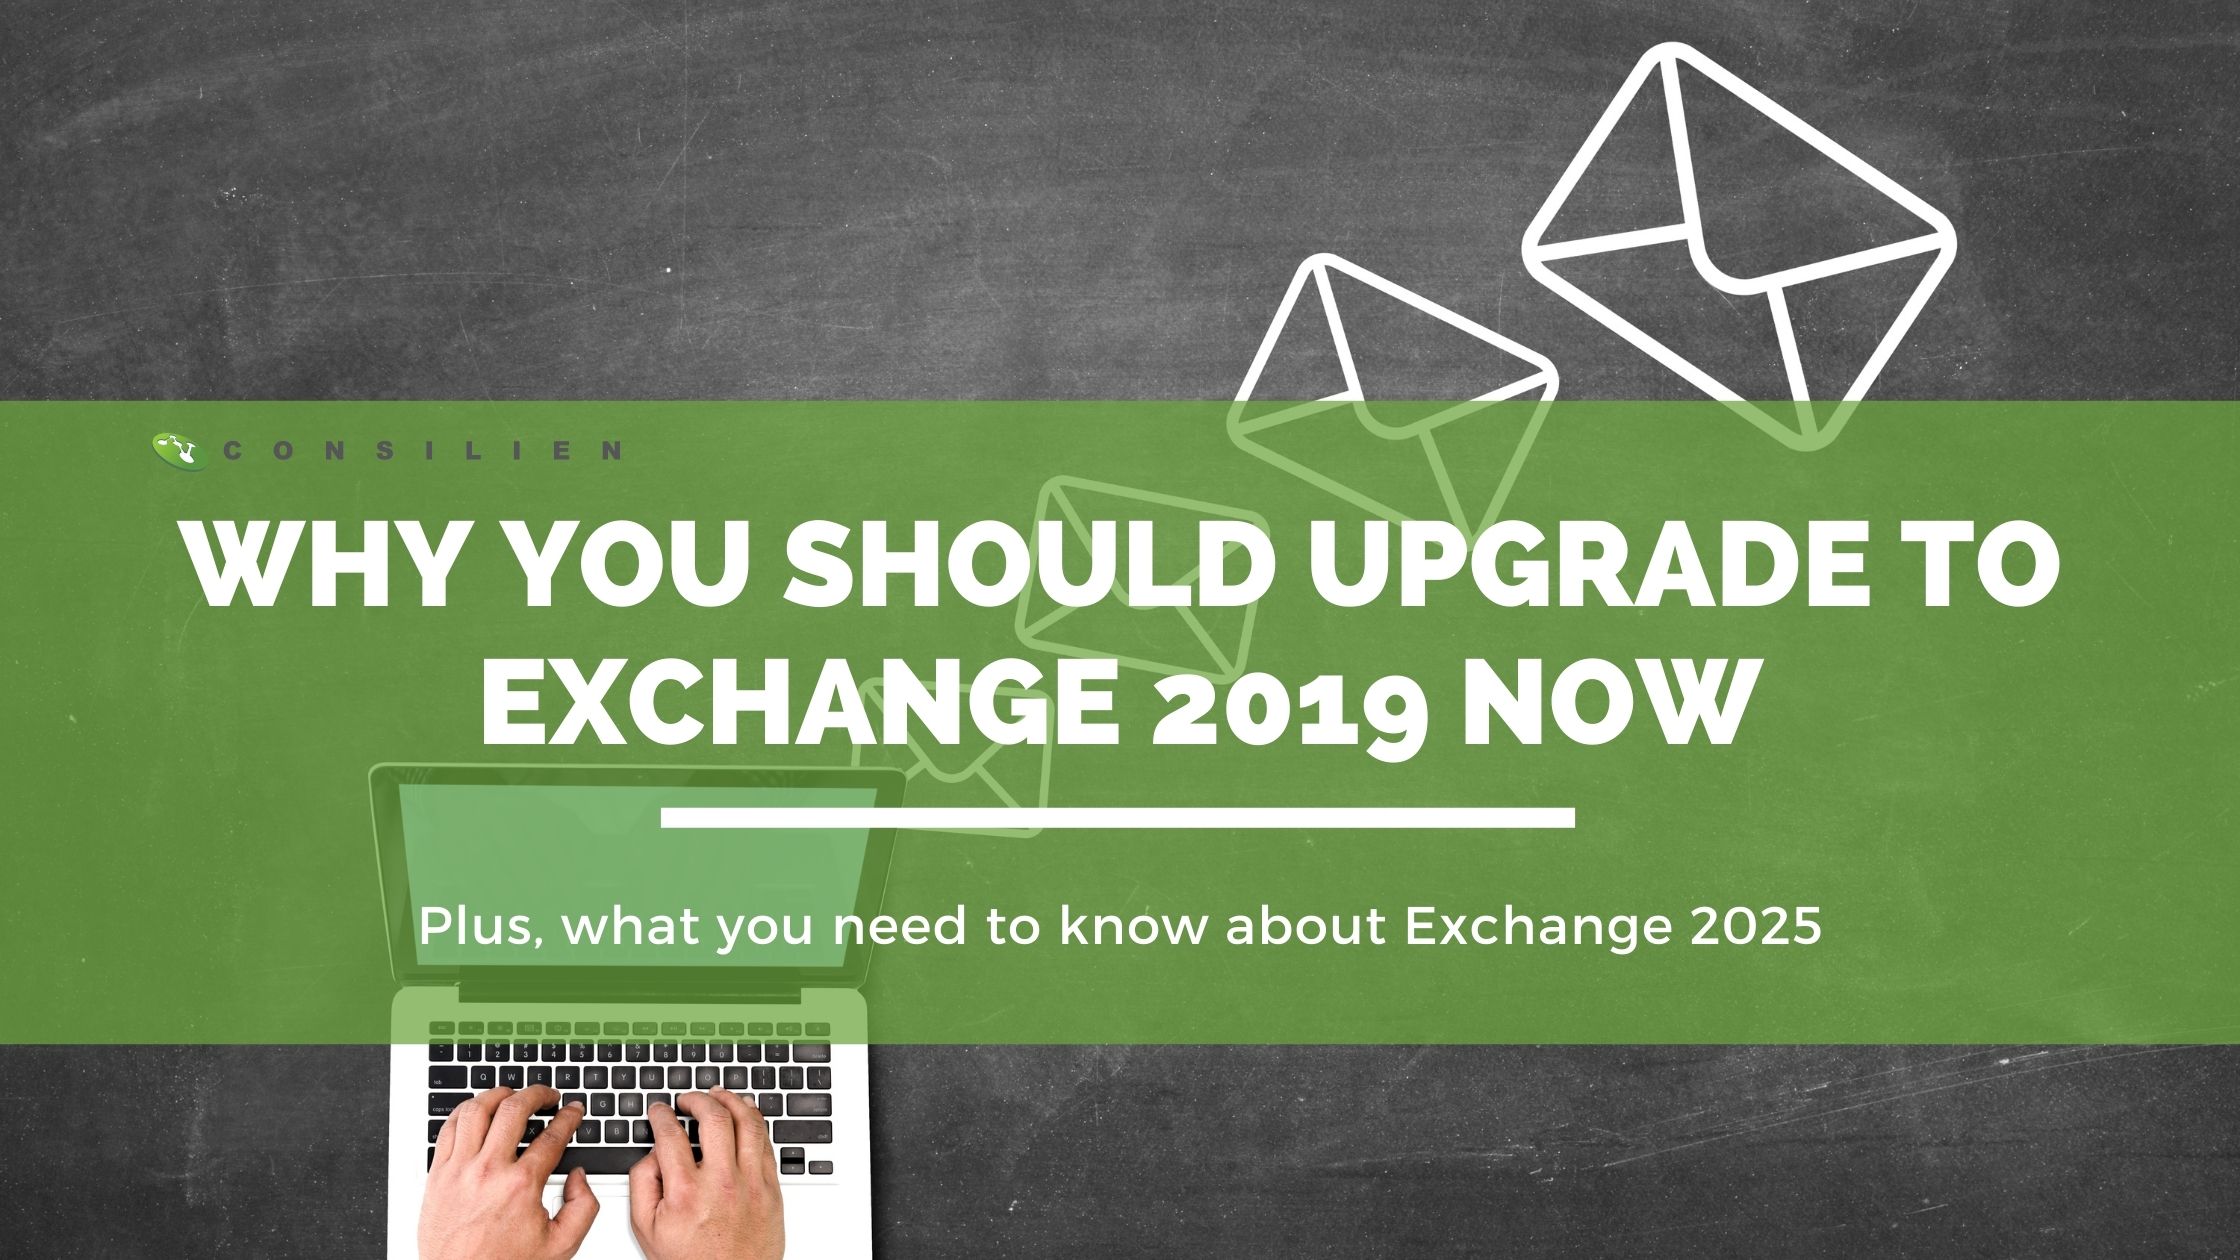 Upgrade to Microsoft Exchange 2019 Before It’s Too Late! (Plus, more on Exchange 2025)